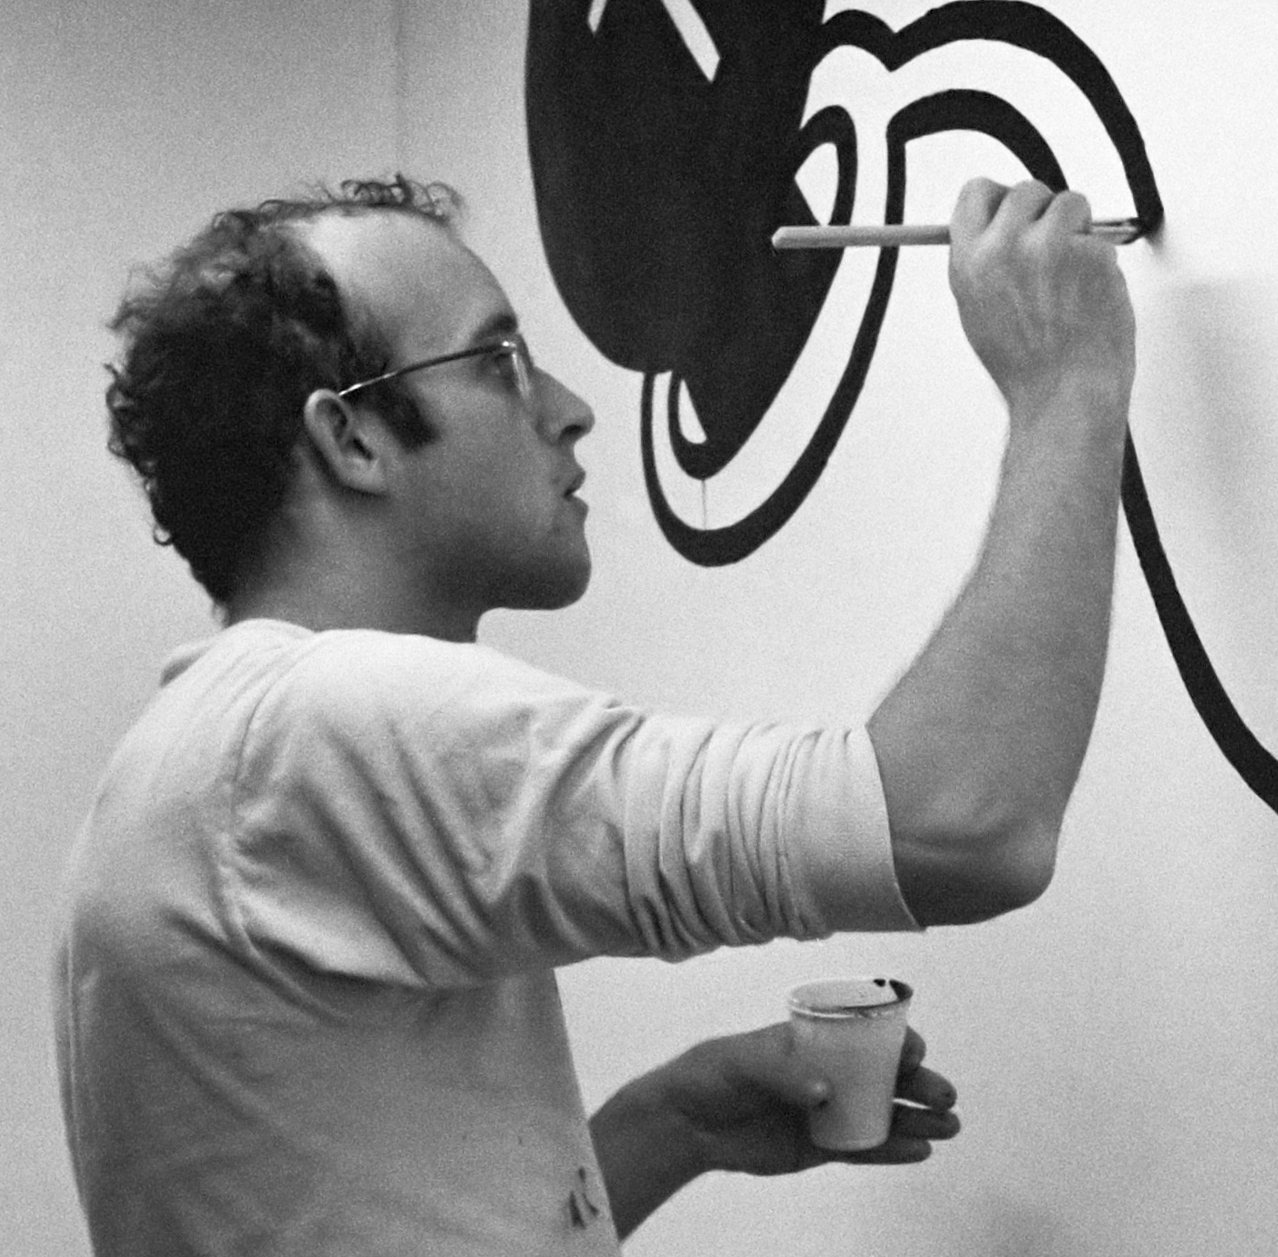 Keith Haring painting in 1986. Image courtesy of Wikipedia